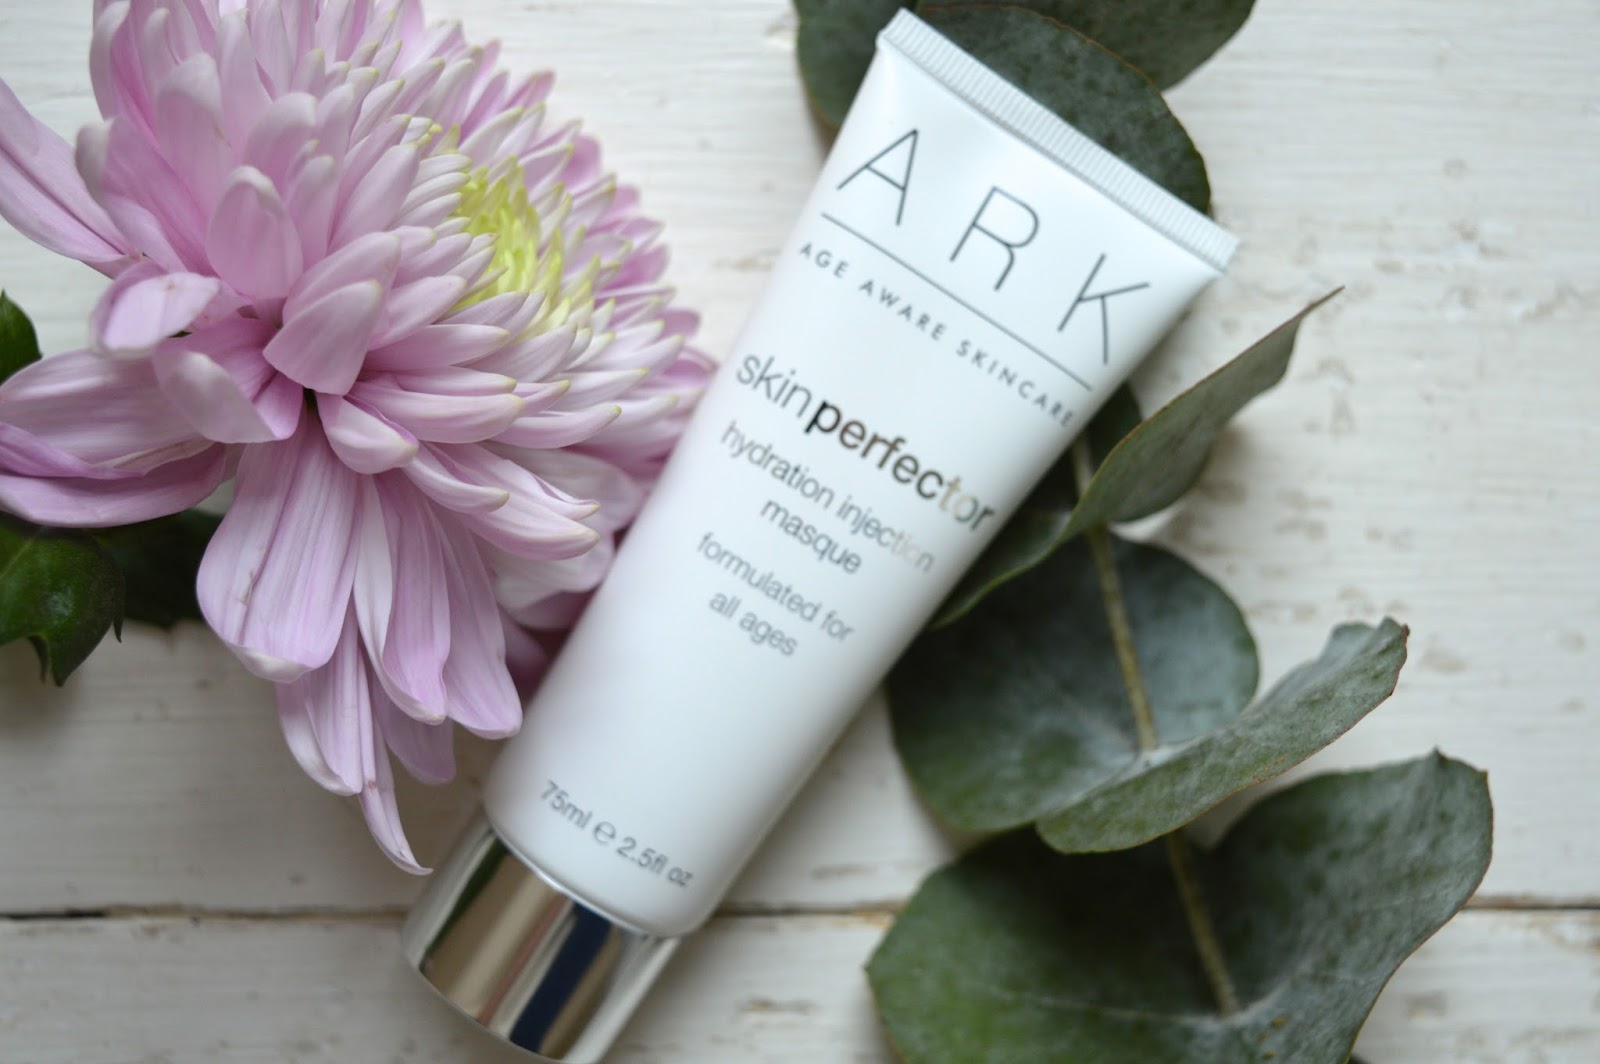 ARK Skincare Hydration Injection Masque review, Dalry Rose Blog, beauty bloggers, UK beauty blog